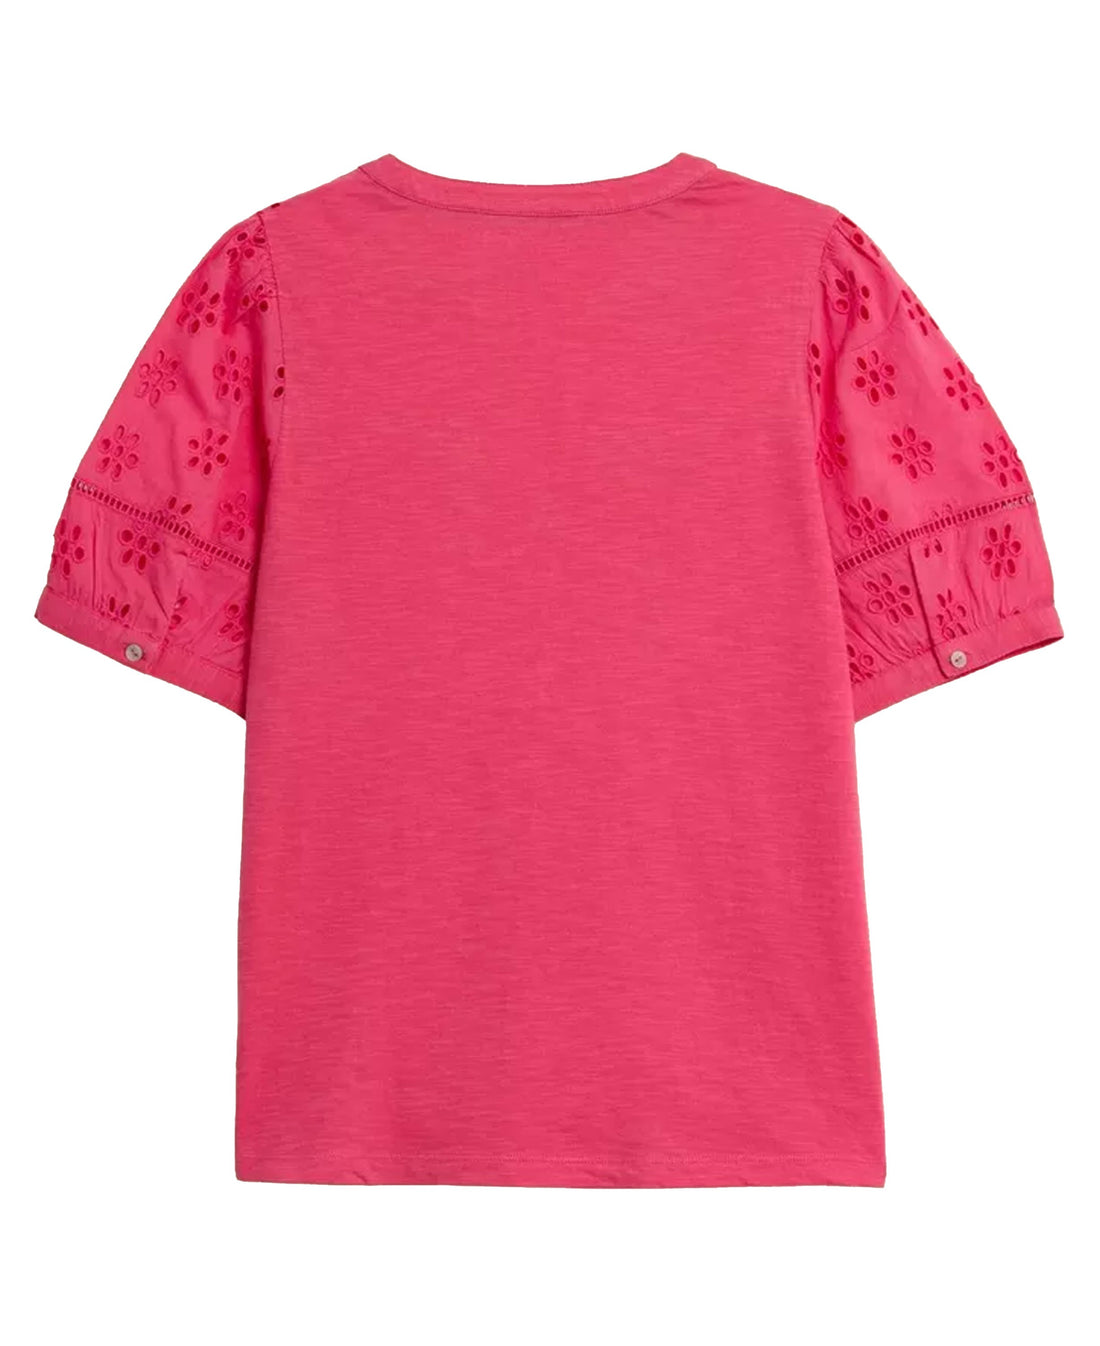 Nelly Notch Neck Tee in MID PINK